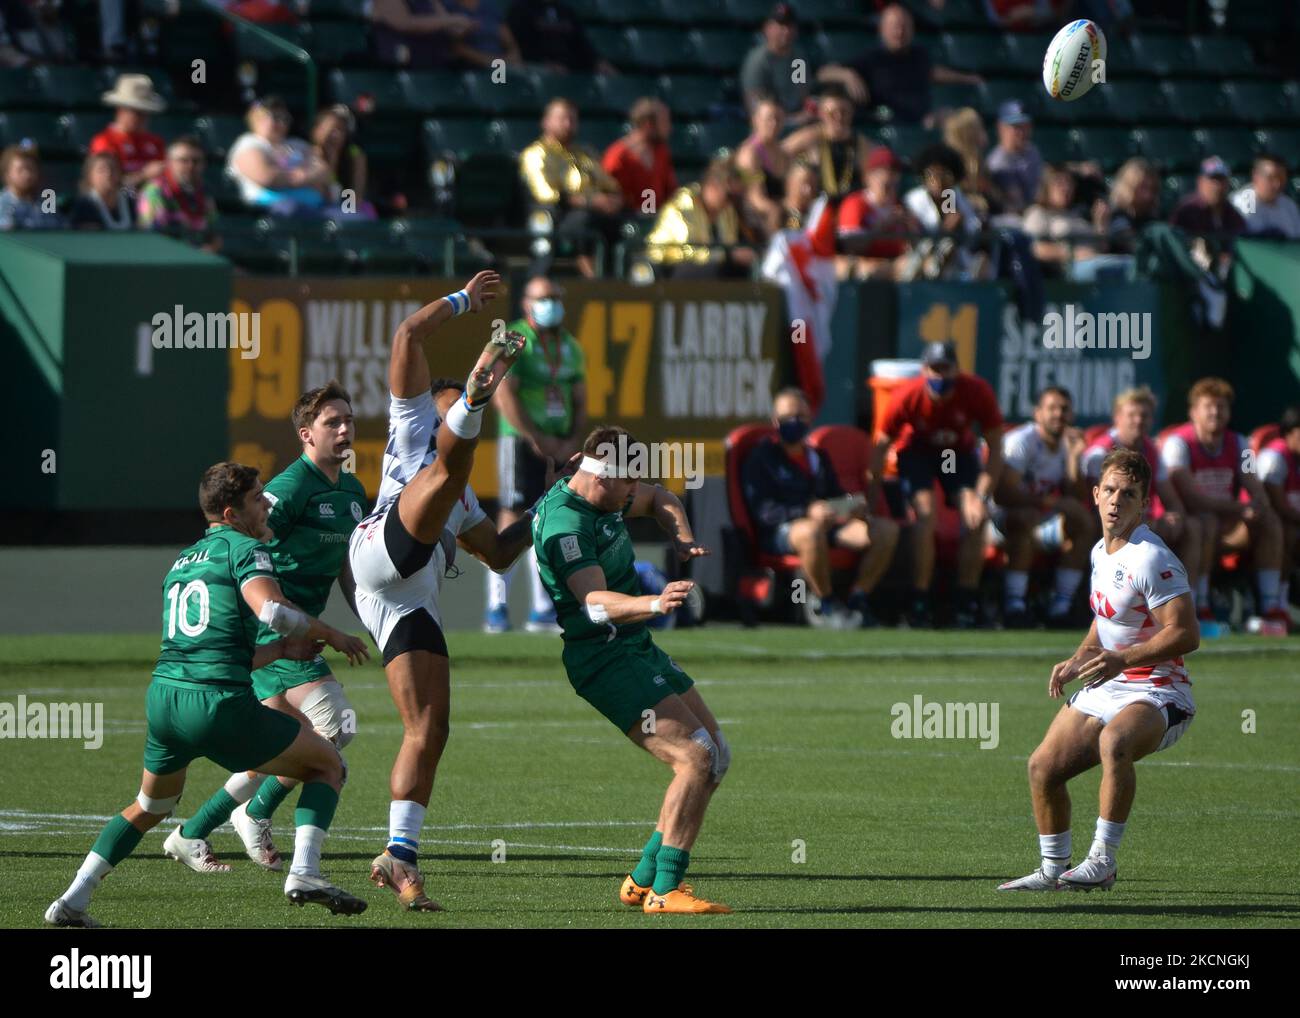 Hong Kong 7S vs Ireland 7S, HSBC World Rugby Seven Series 7th Place Play-Off match at the Commonwealth Stadium in Edmonton. On Sunday, 26 September 2021, in Edmonton, Alberta, Canada. (Photo by Artur Widak/NurPhoto) Stock Photo